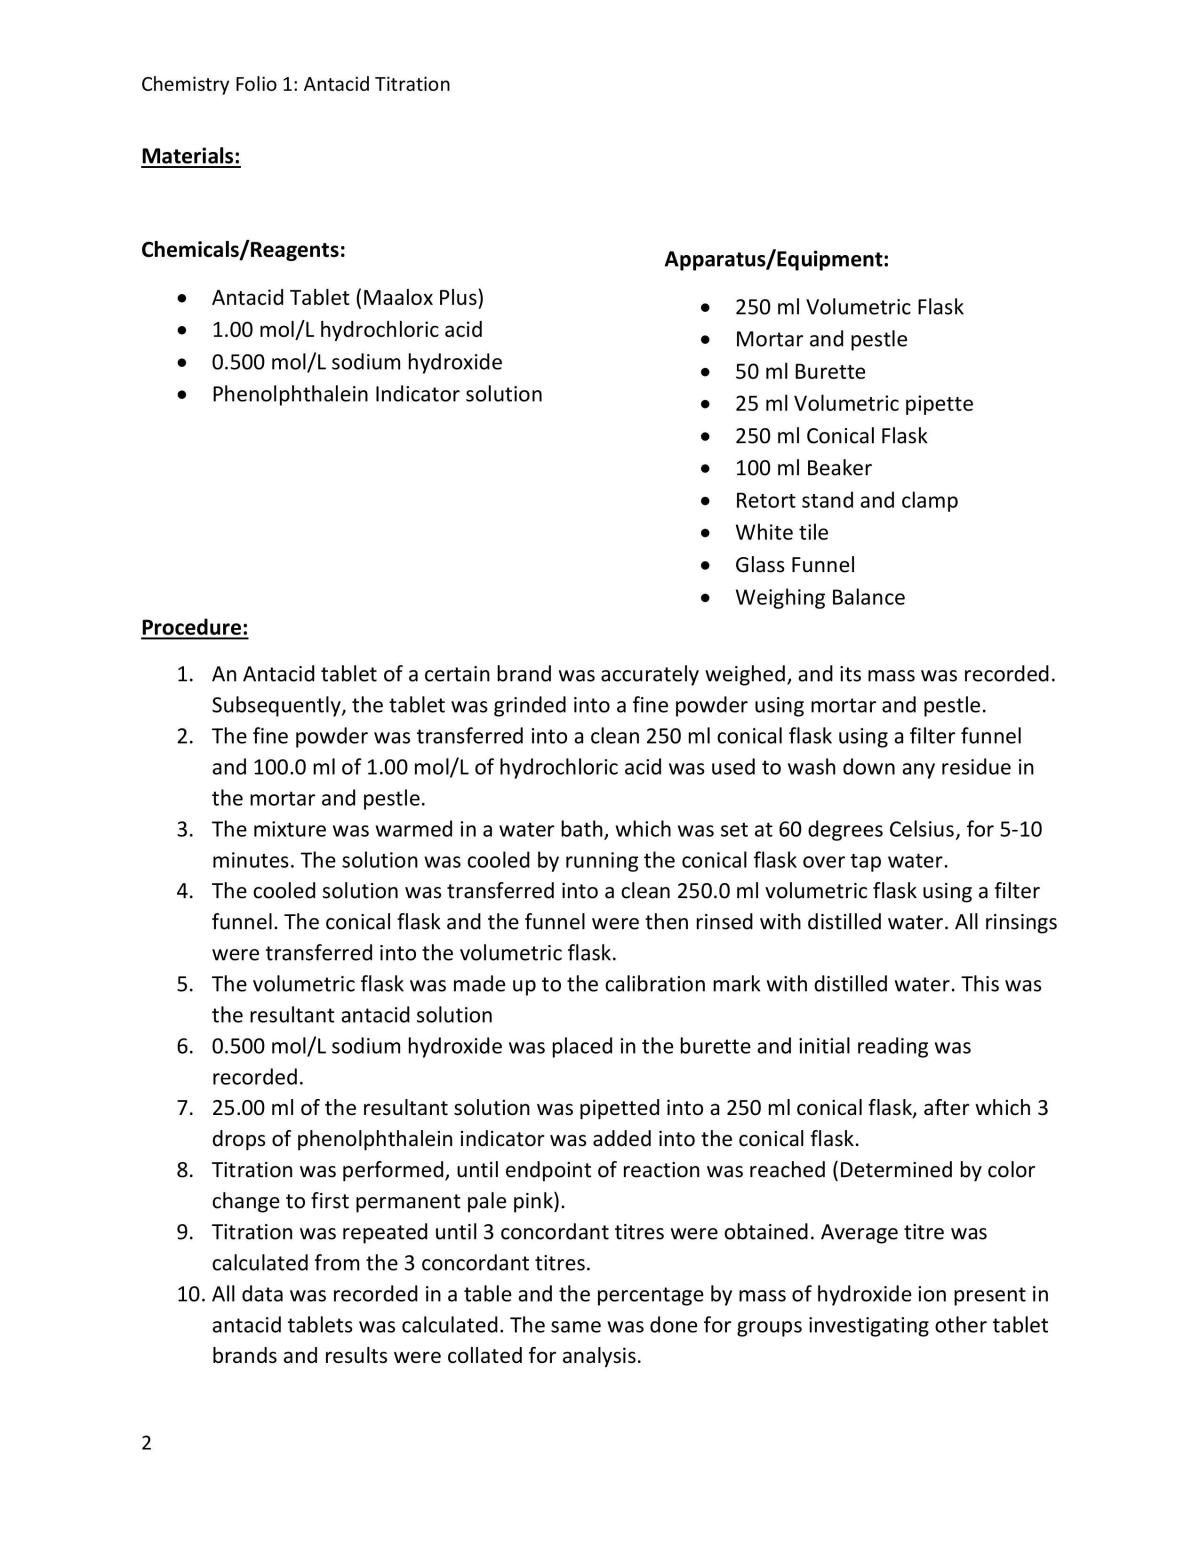 Antacid Titration Write-up - Page 2